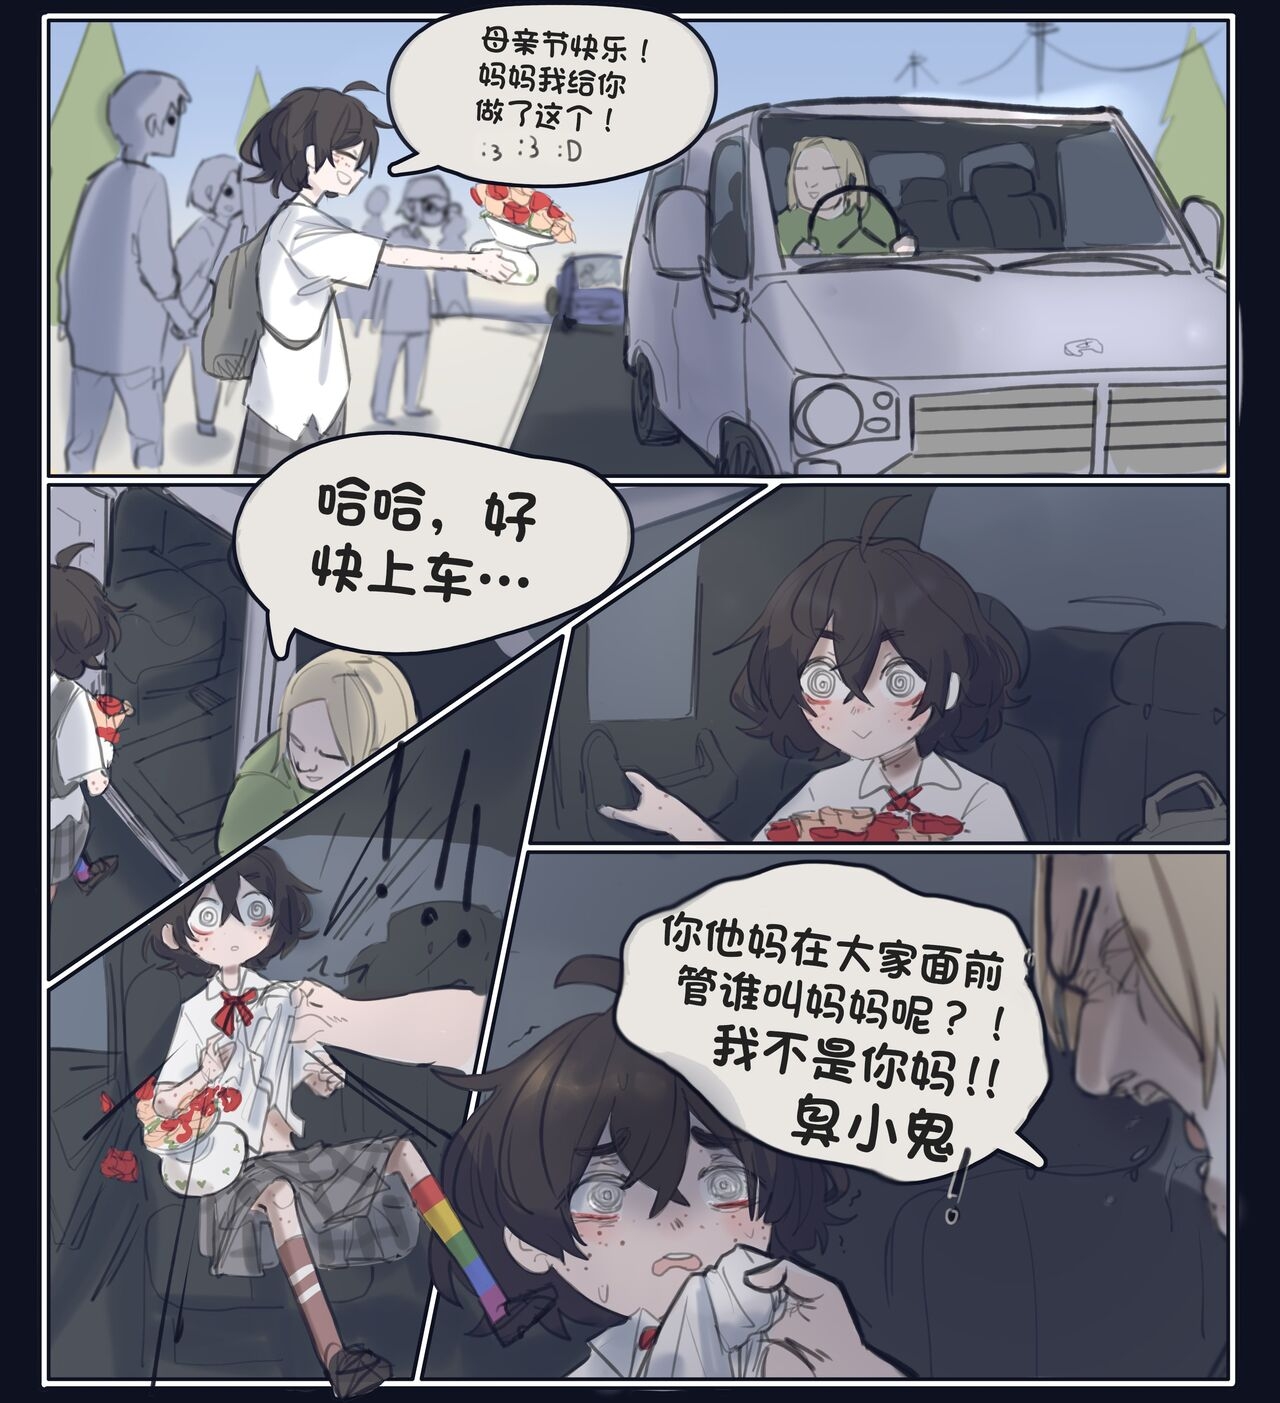 [popopoka] Blind Girl's accident [Chinese] [白杨汉化组] 78